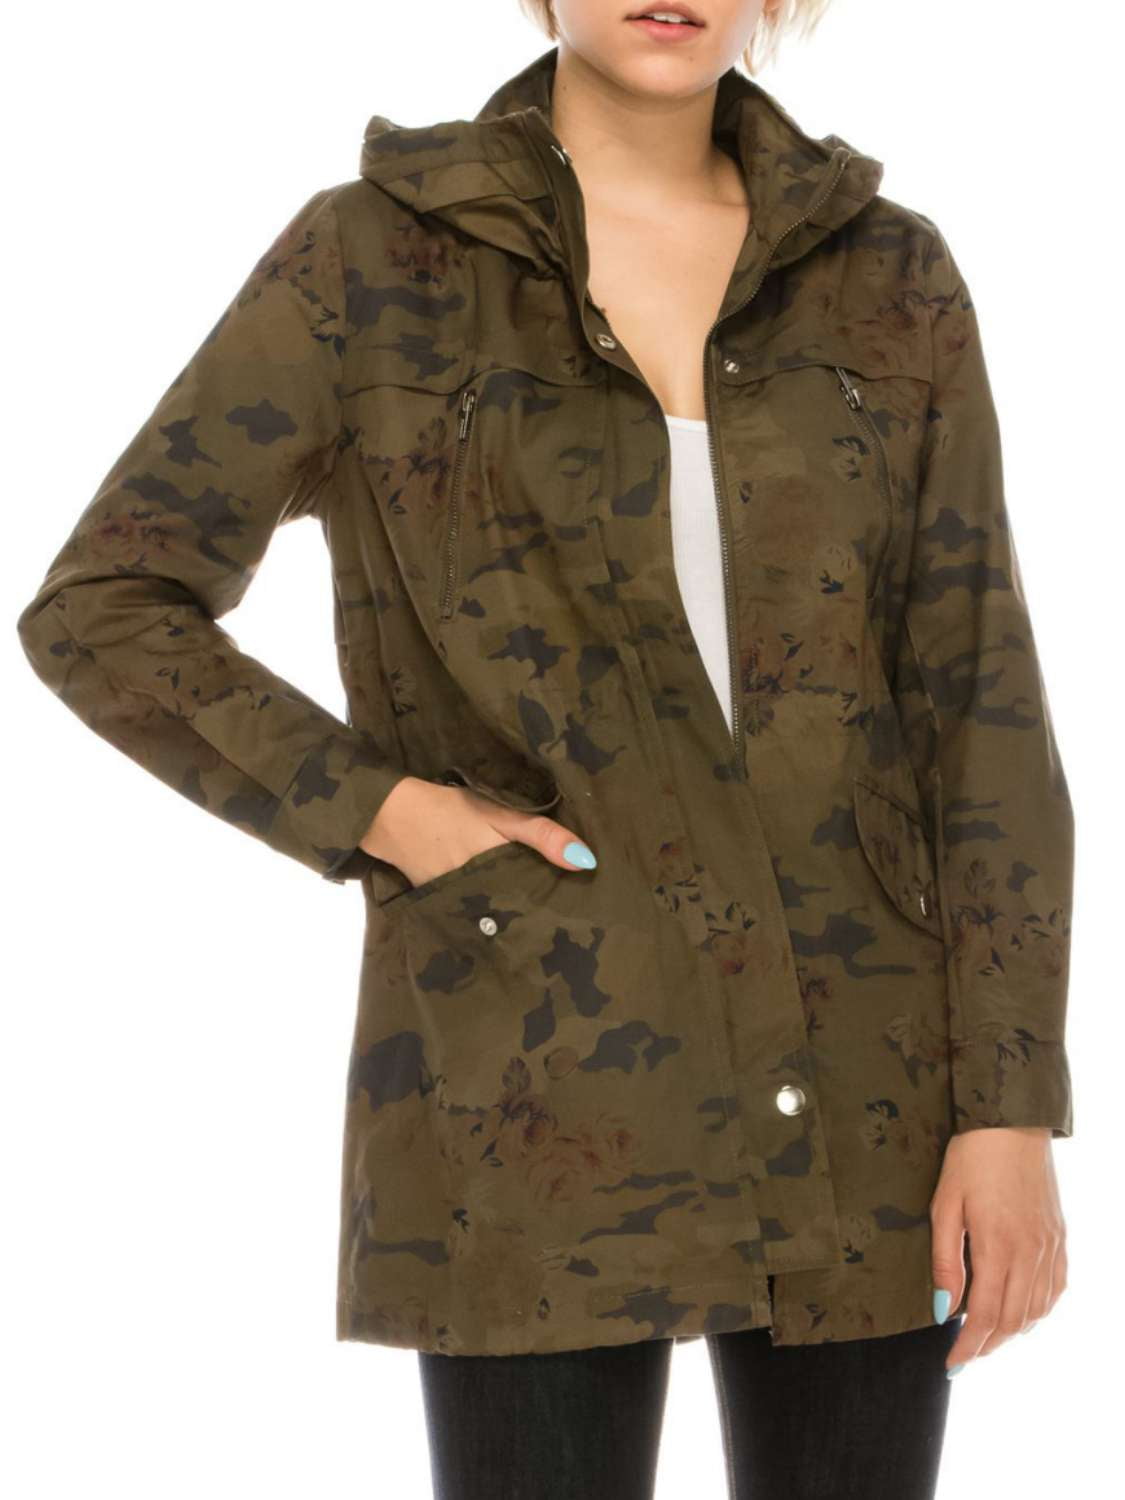 Women Camouflage Printed Long Sleeves Button Belted Casual Jacket Coat Plus Size